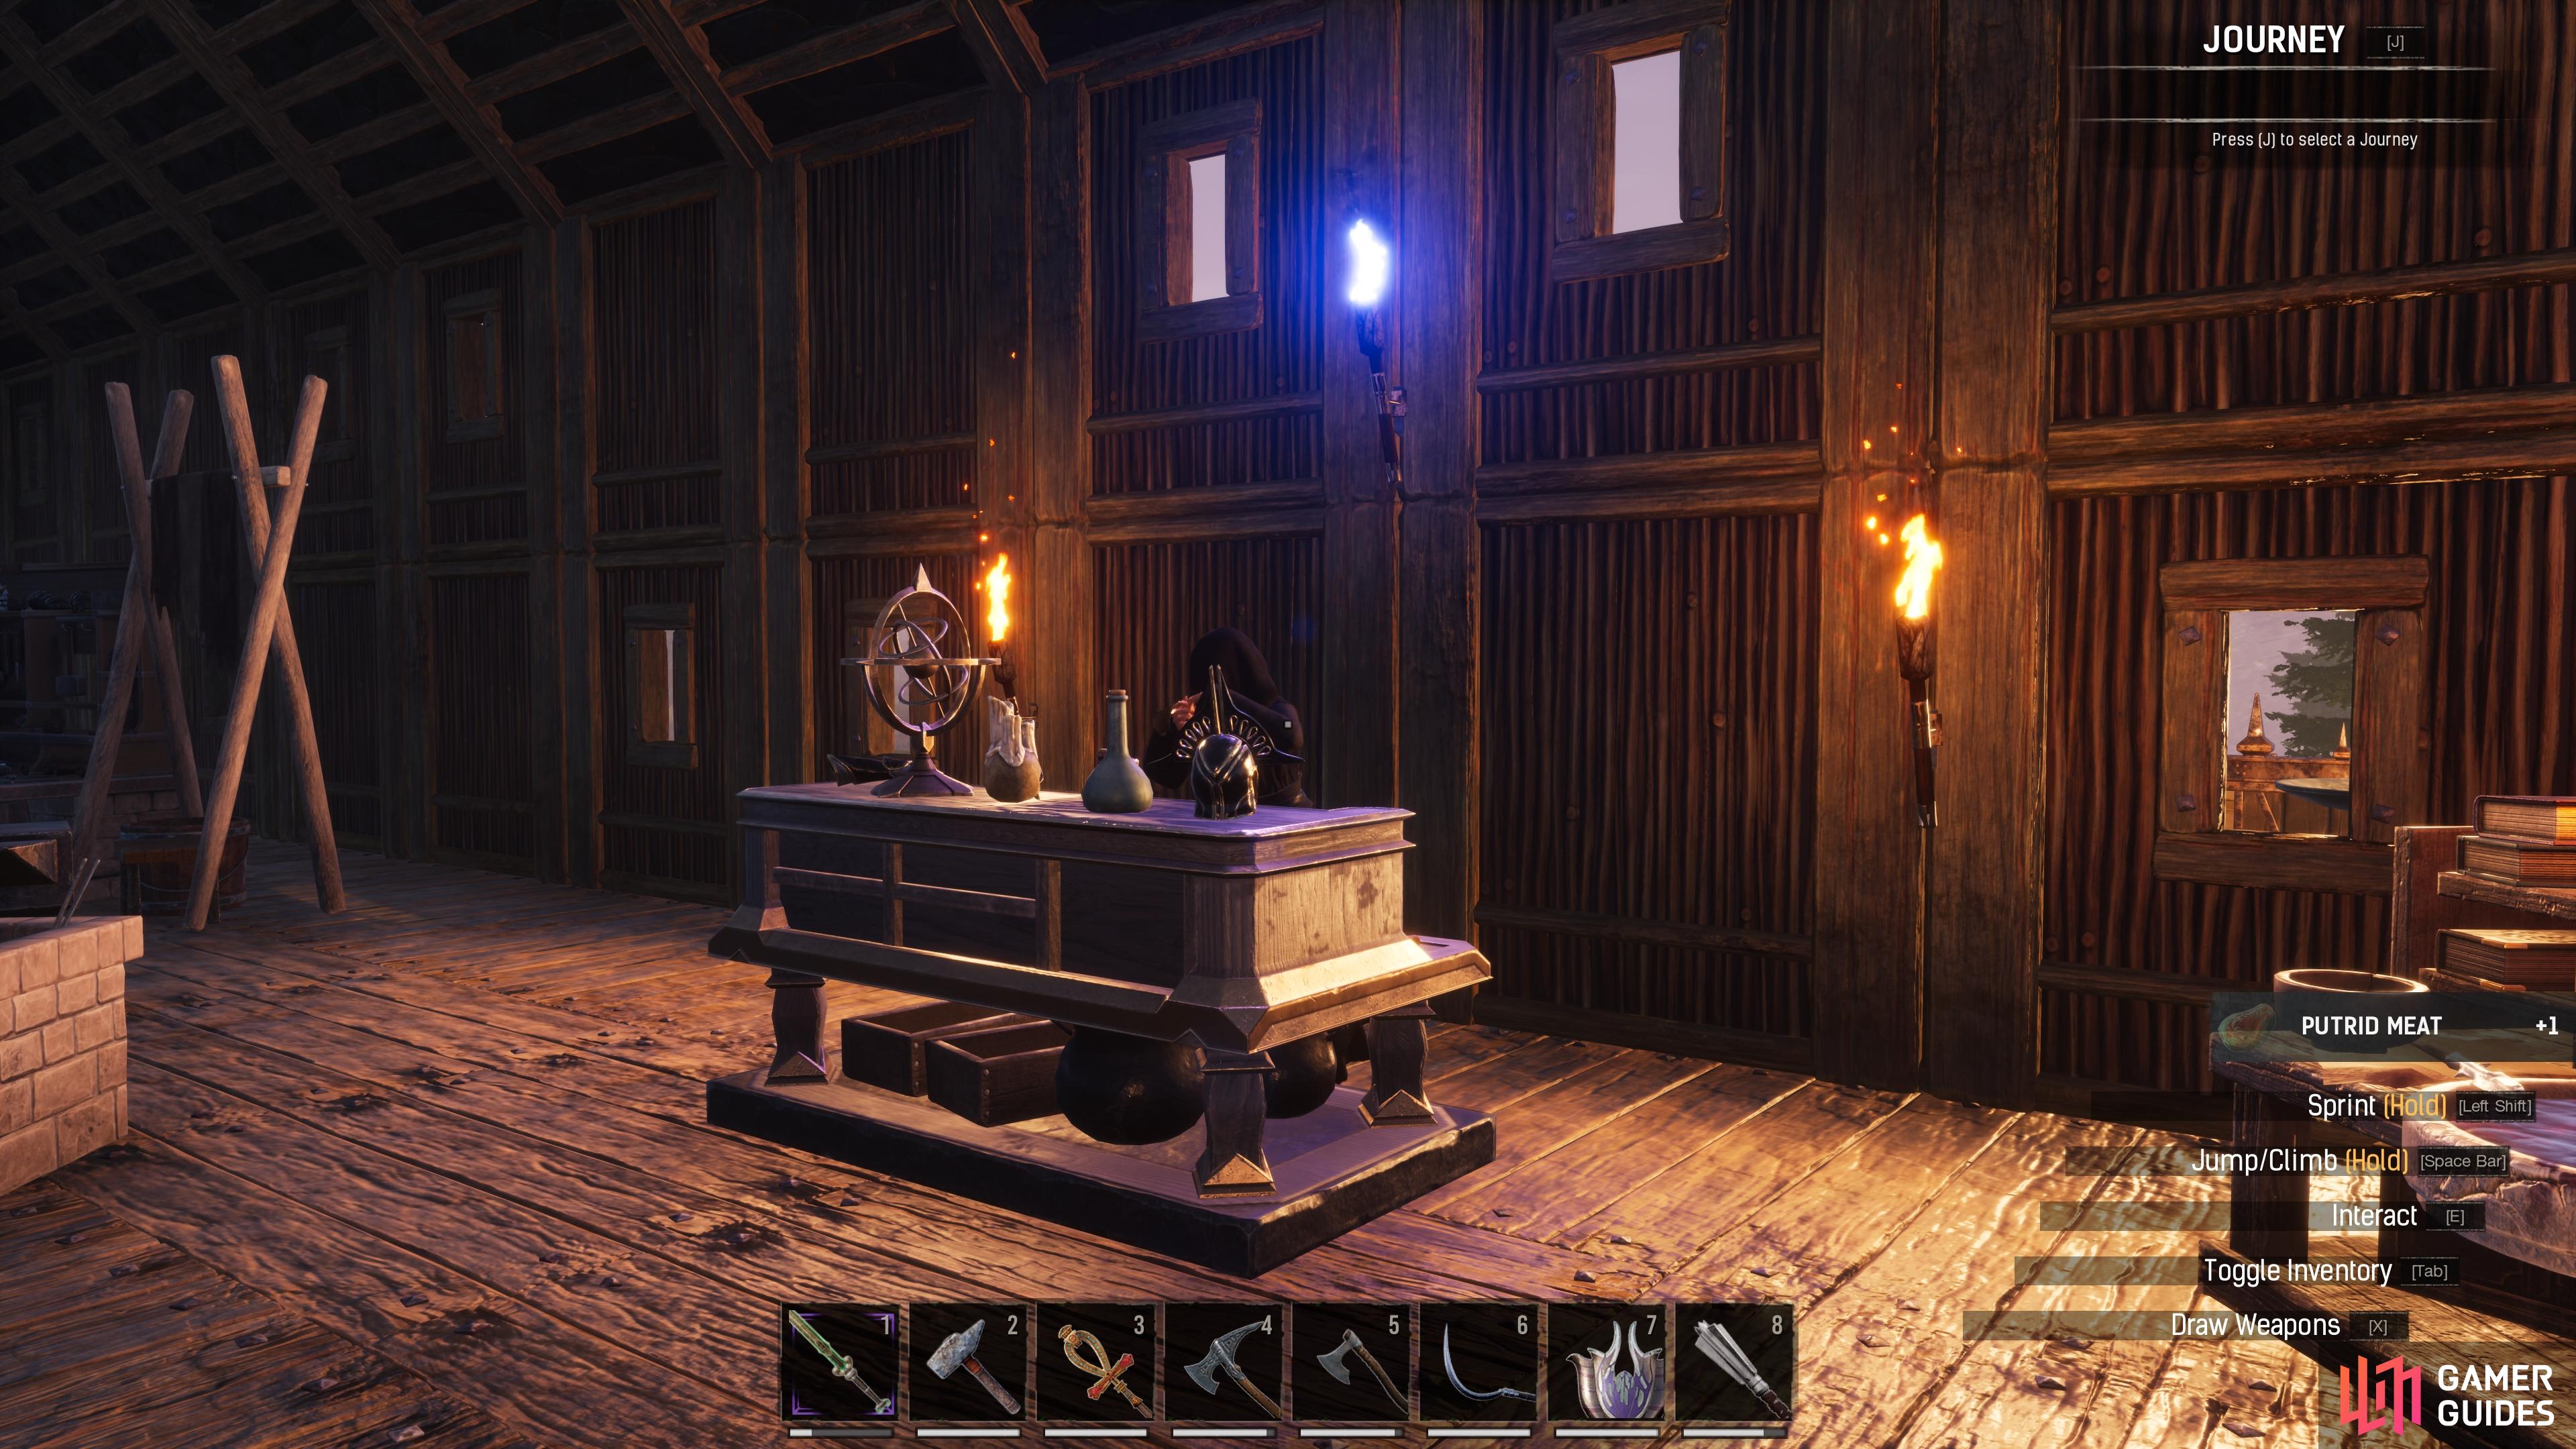 The new Delving Bench in Conan Exiles allows you to get more unique items, but at a greater cost.